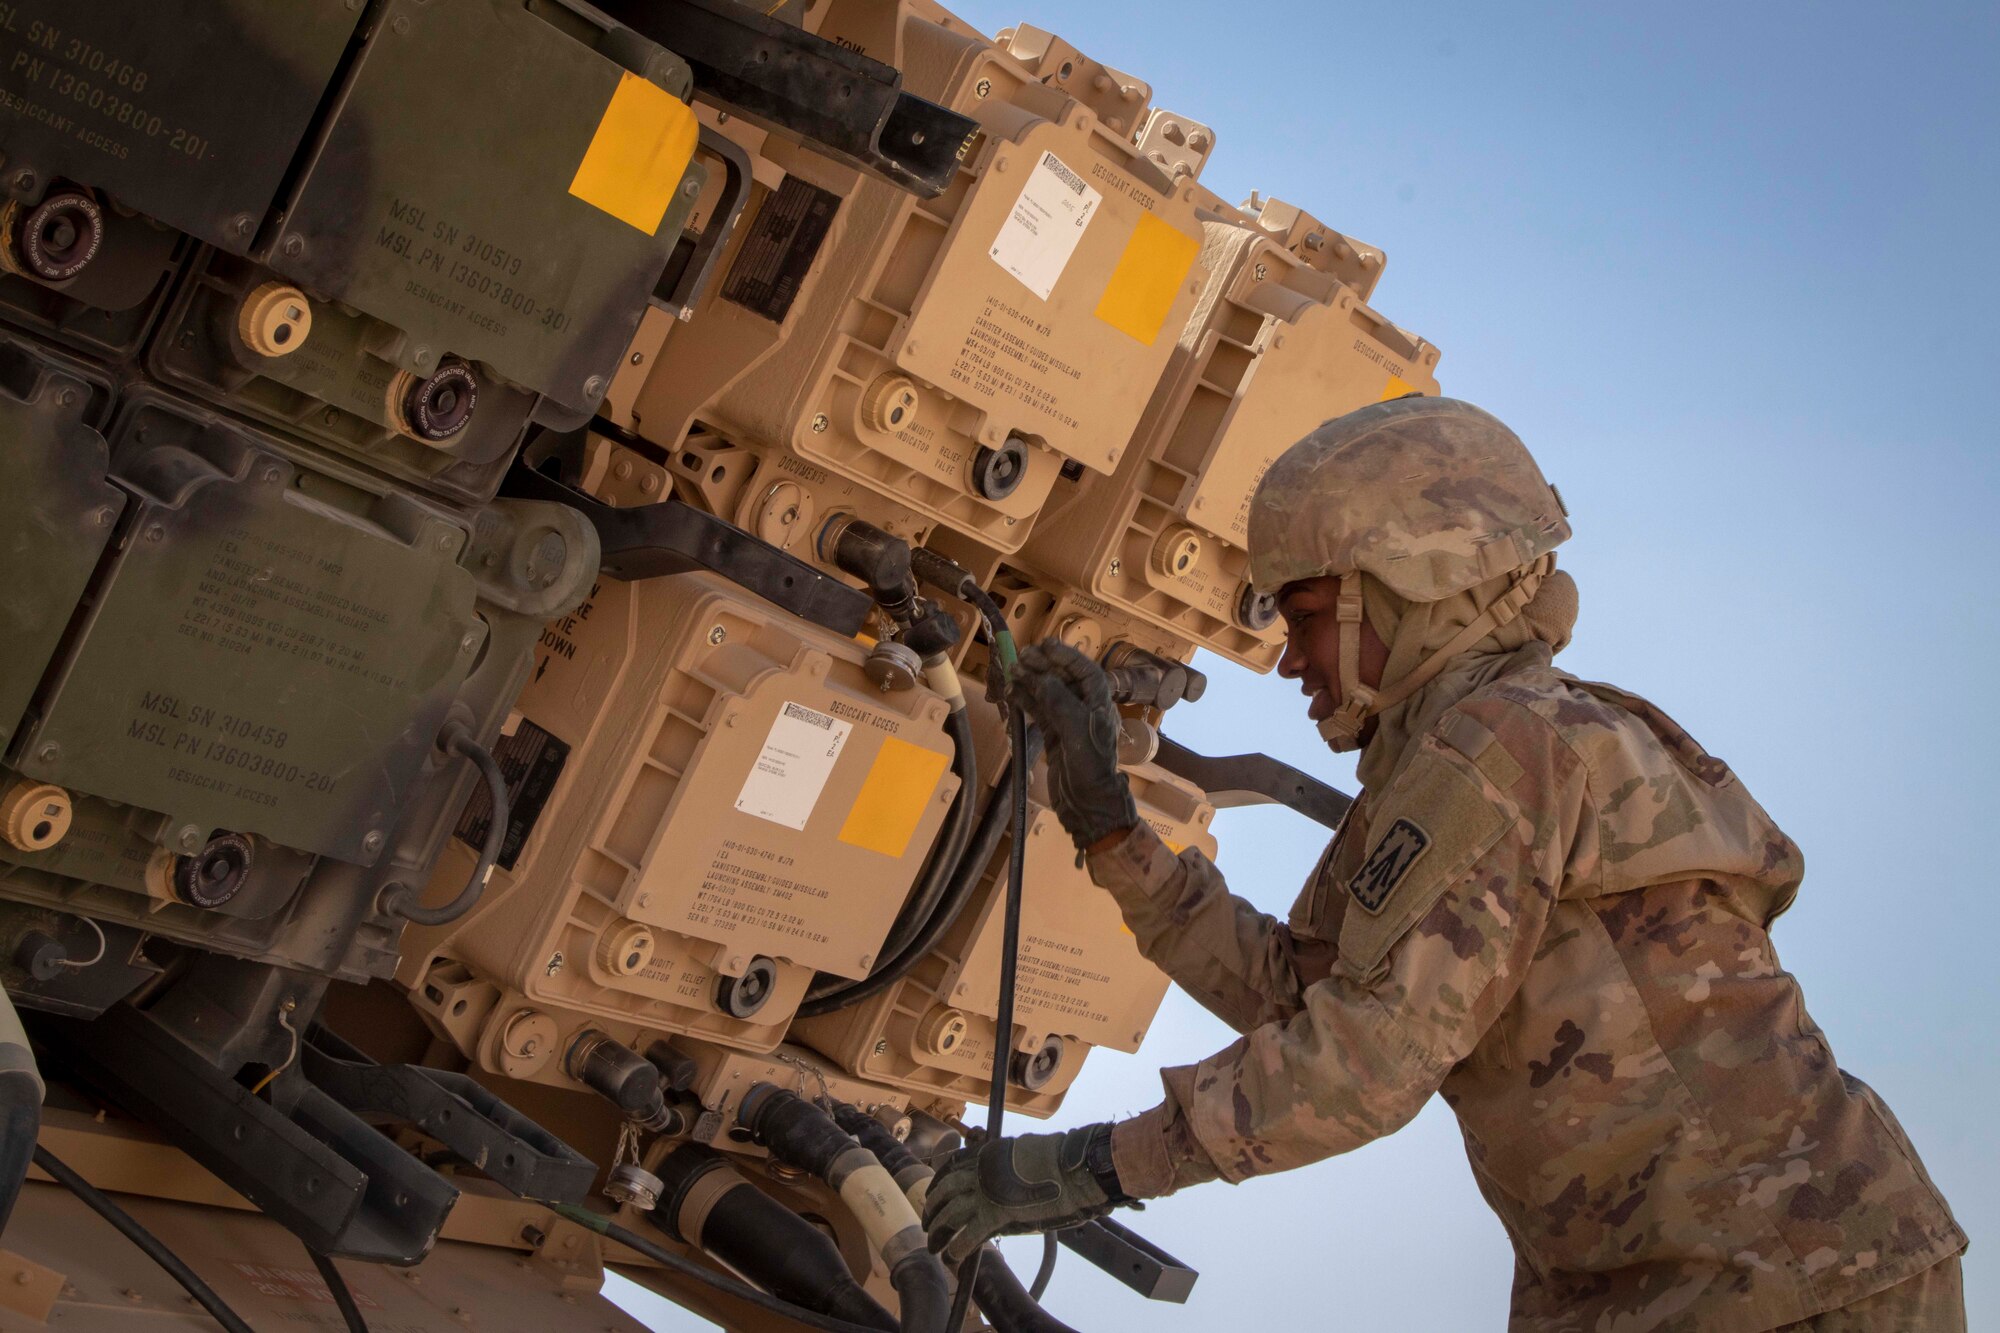 U.S. Army Pfc. Maya Richardson, a Patriot Launching Station Enhanced Operator-Maintainer assigned to Charlie Battery, 3rd Battalion, 4th Air Defense Artillery, 108th Air Defense Artillery Brigade, inspects the cables to her assigned MIM-104 Patriot missile system.